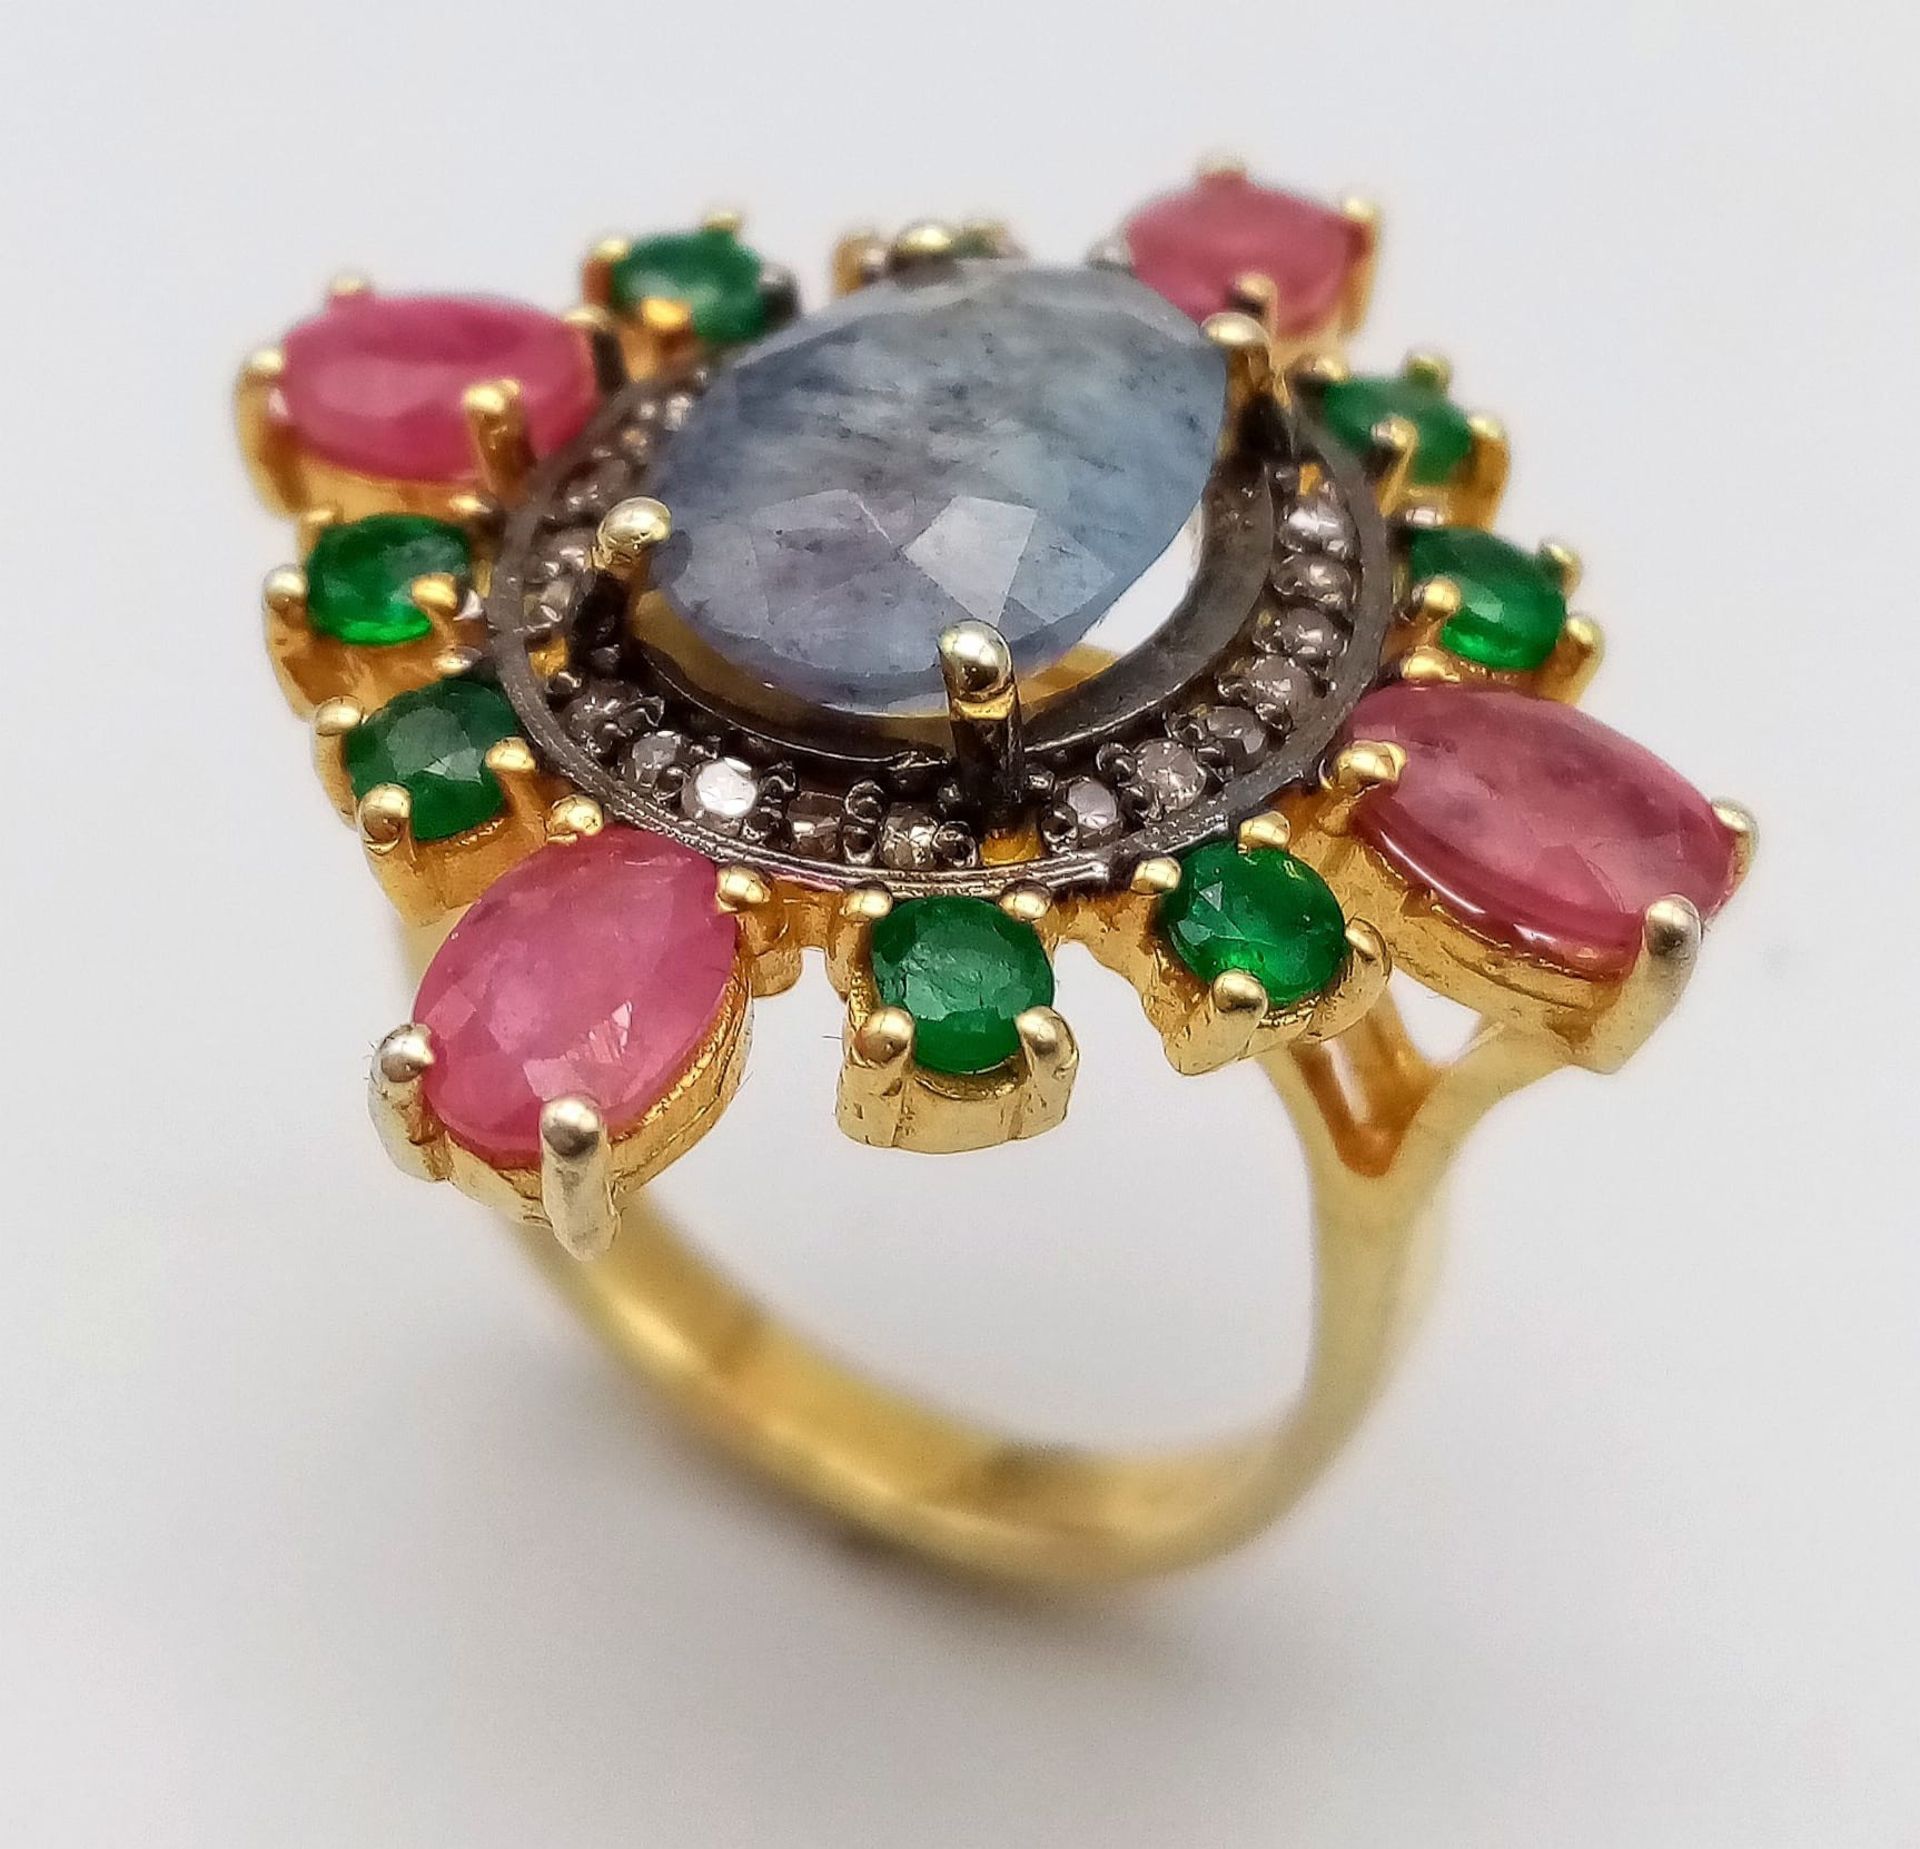 A Blue Sapphire, Ruby, Emerald and Diamond Ring set in Gold Plated 925 silver. Weight - 7.40g.